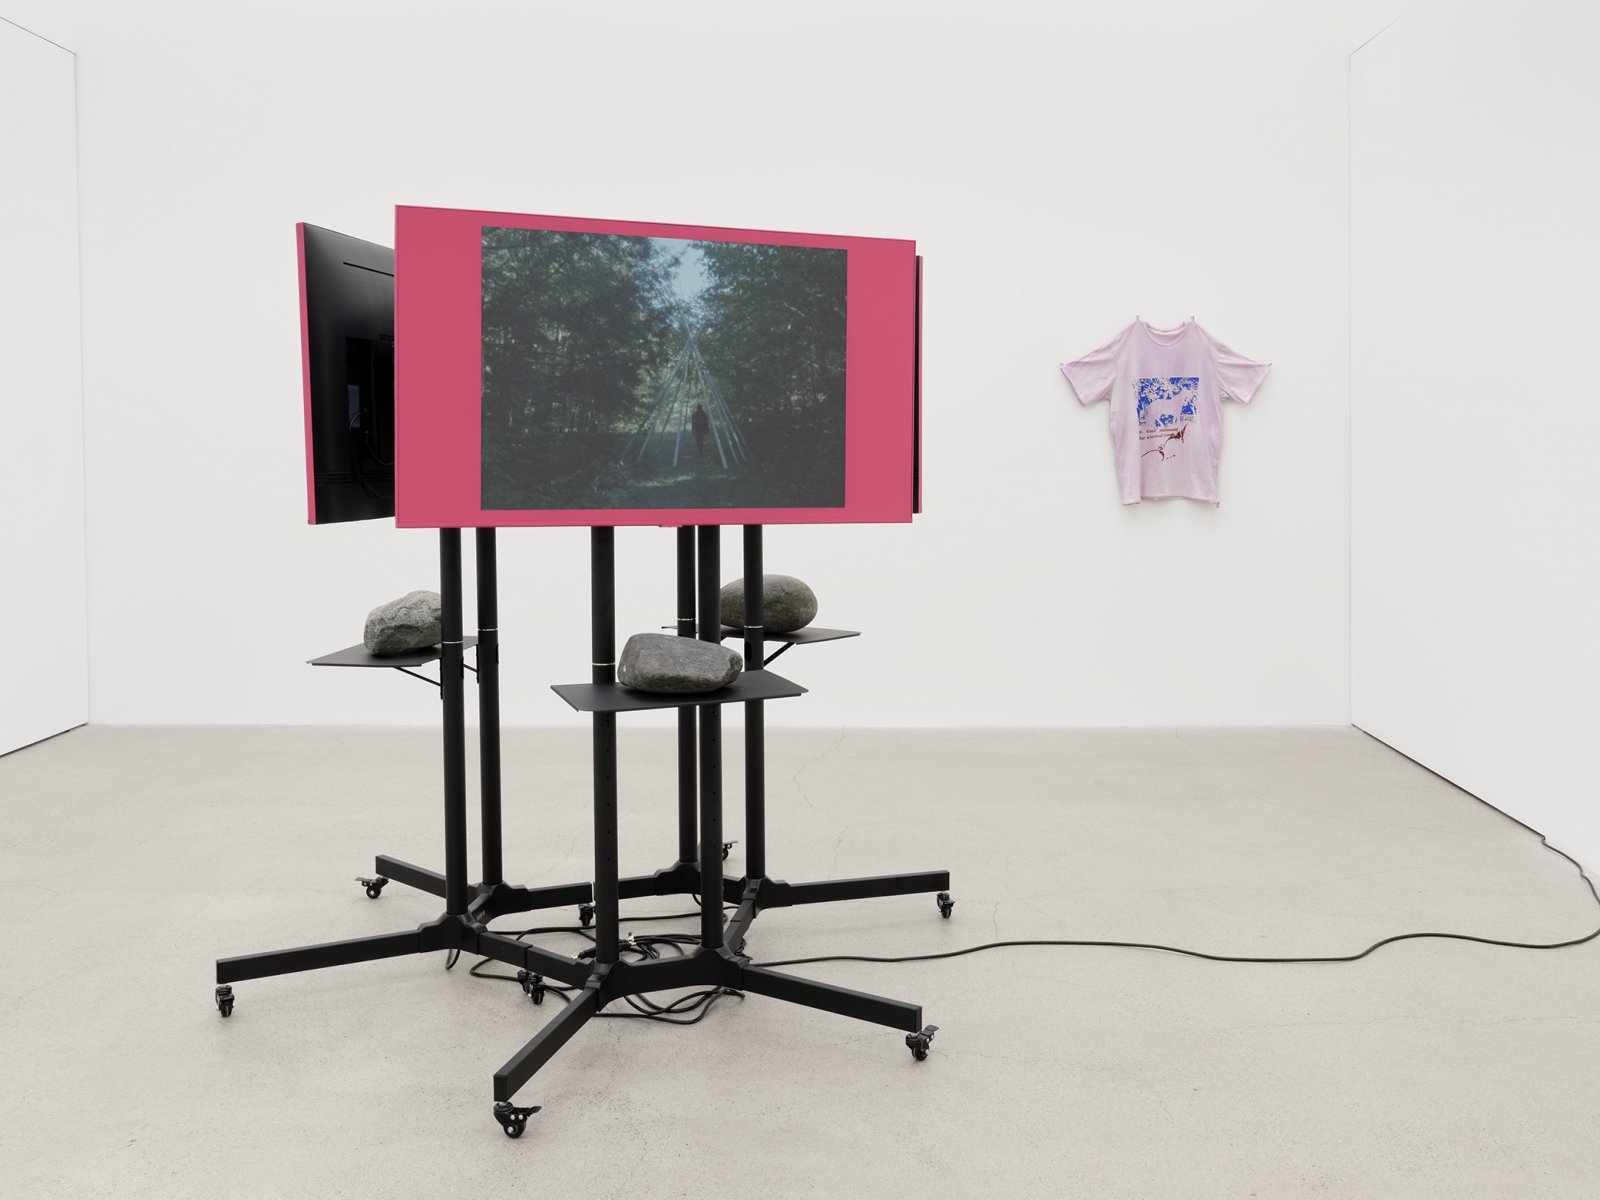 Duane Linklater, installation view, primaryuse, Catriona Jeffries, Vancouver, 2020 by Duane Linklater